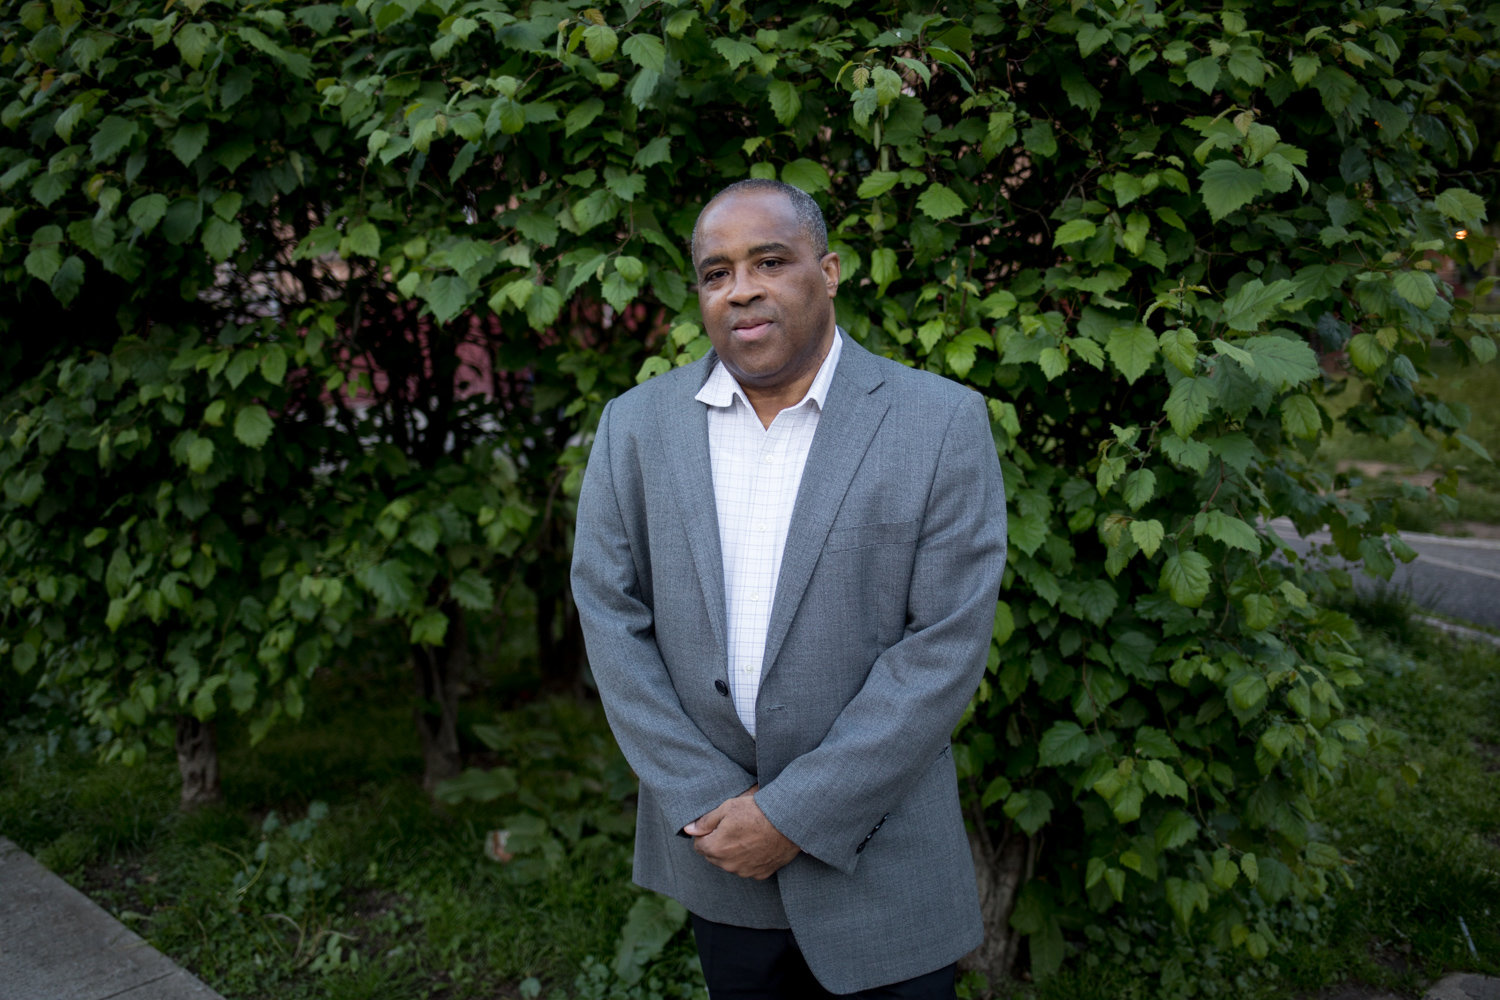 Tony Edwards, vice president of the Marble Hill Tenants Association, knows there are problems with NYCHA, but lately, he feels it hasn’t been all that bad. He wishes residents would be more diligent with filing and keeping records of complaints, however.